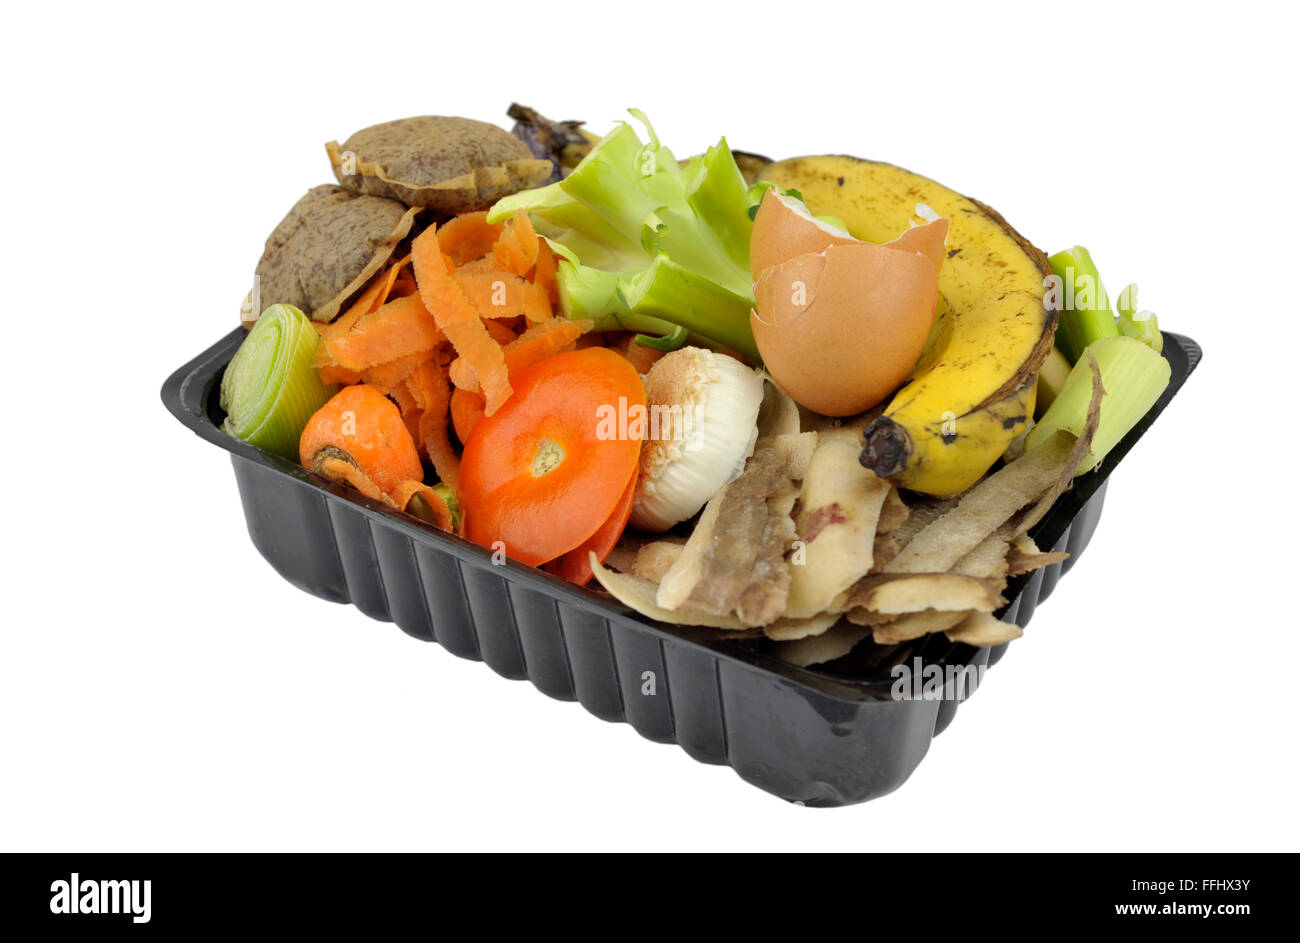 Vegetable, fruit household kitchen food waste, collected in re-used packaging, for home composting or adding to worm bin. Stock Photo